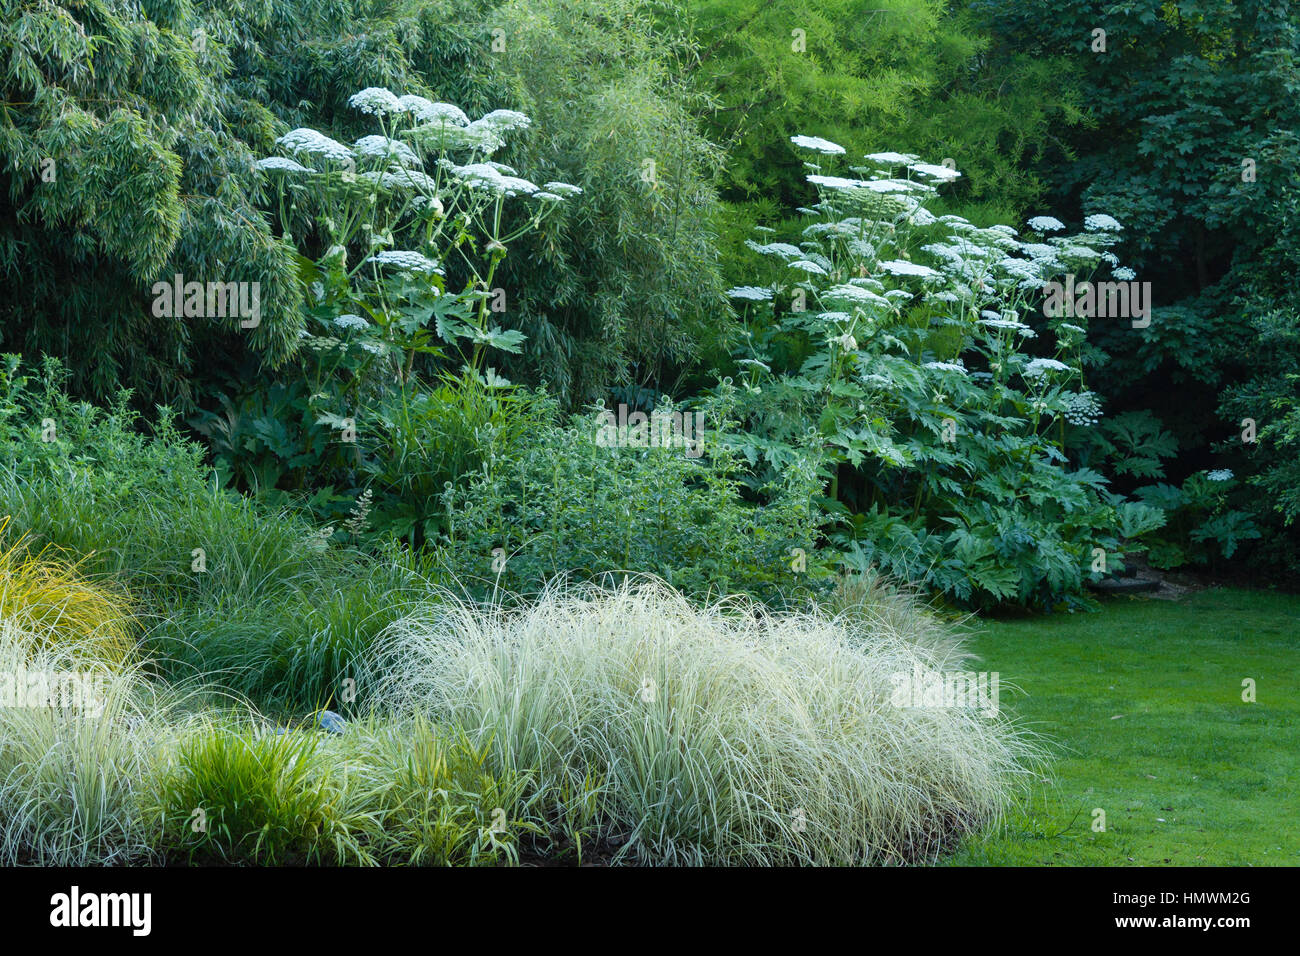 Bed of grasses in spring, Jardins du pays d'Auge, Normandy, France Stock Photo